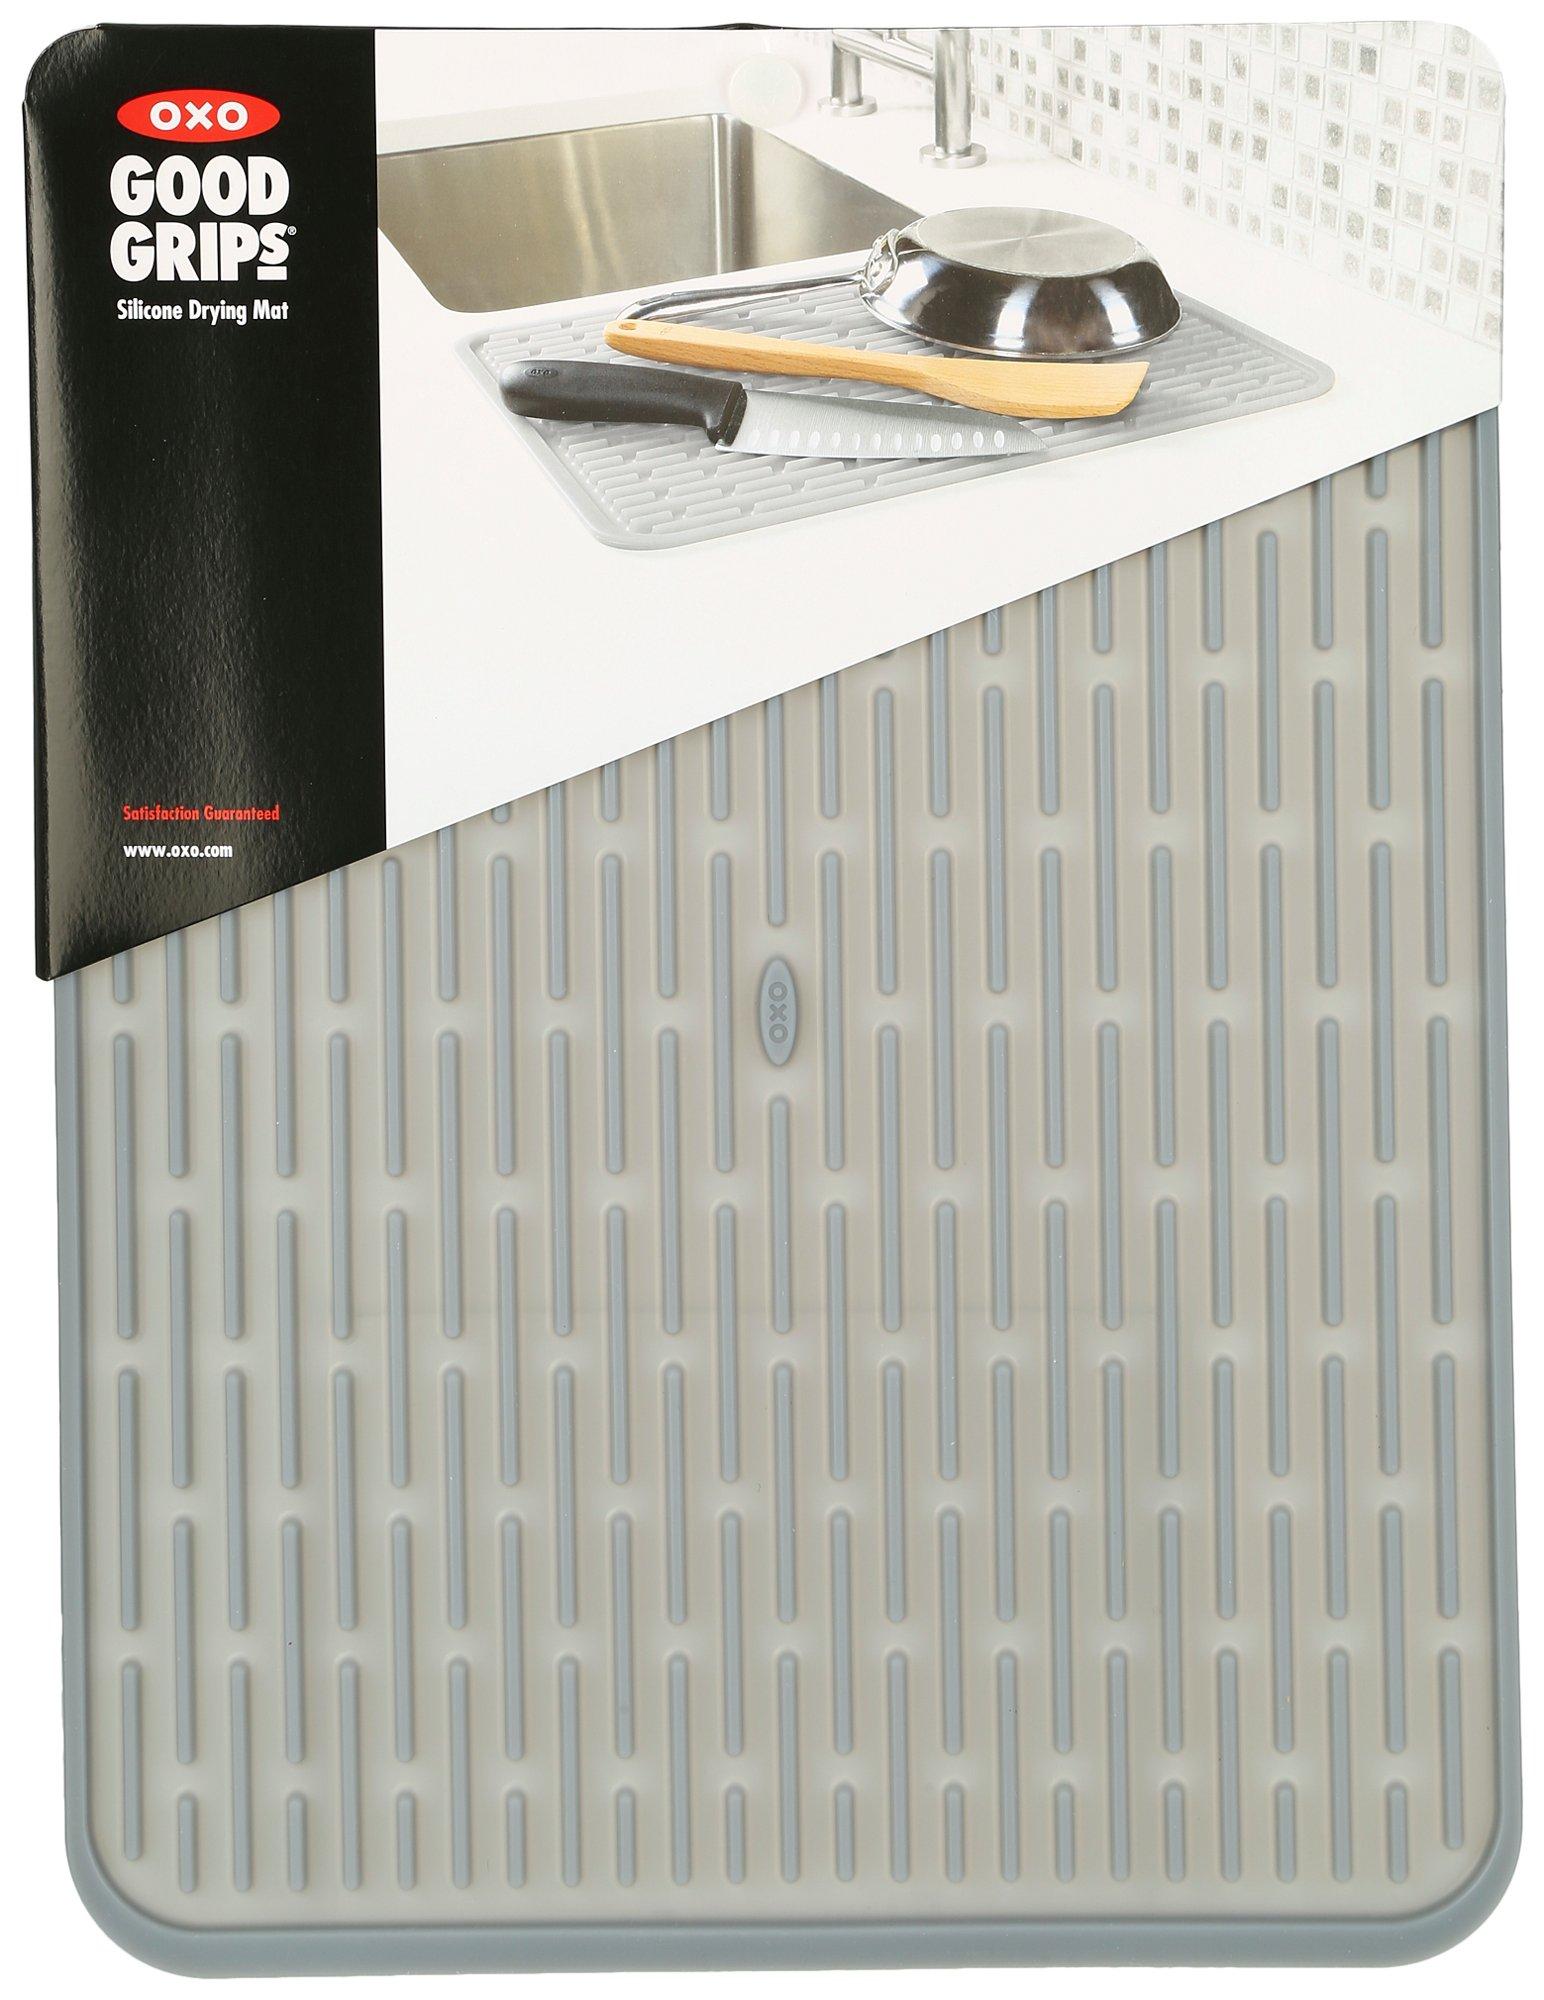  OXO Good Grips Large Silicone Drying Mat, Large (Gray